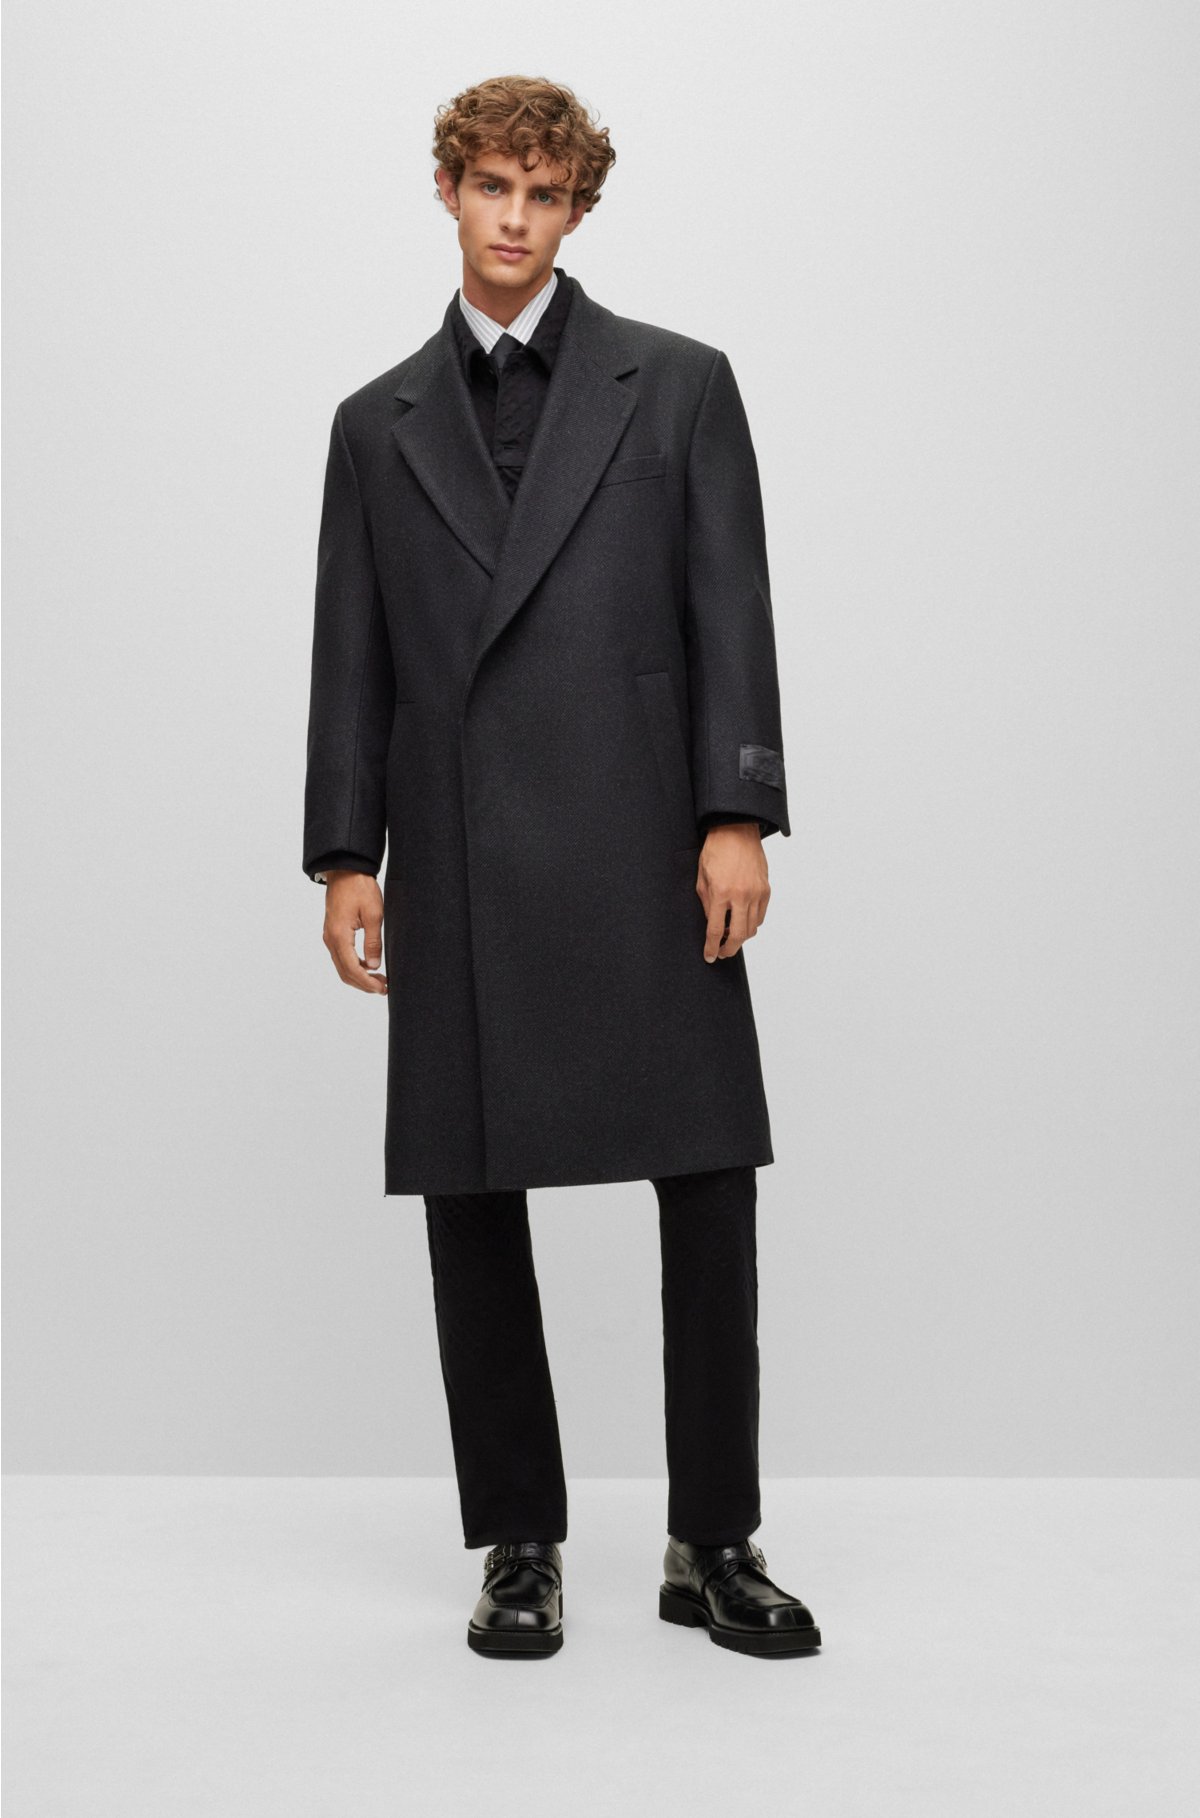 Statement Men's Full Length 100% Wool Top Coat - Double Breasted